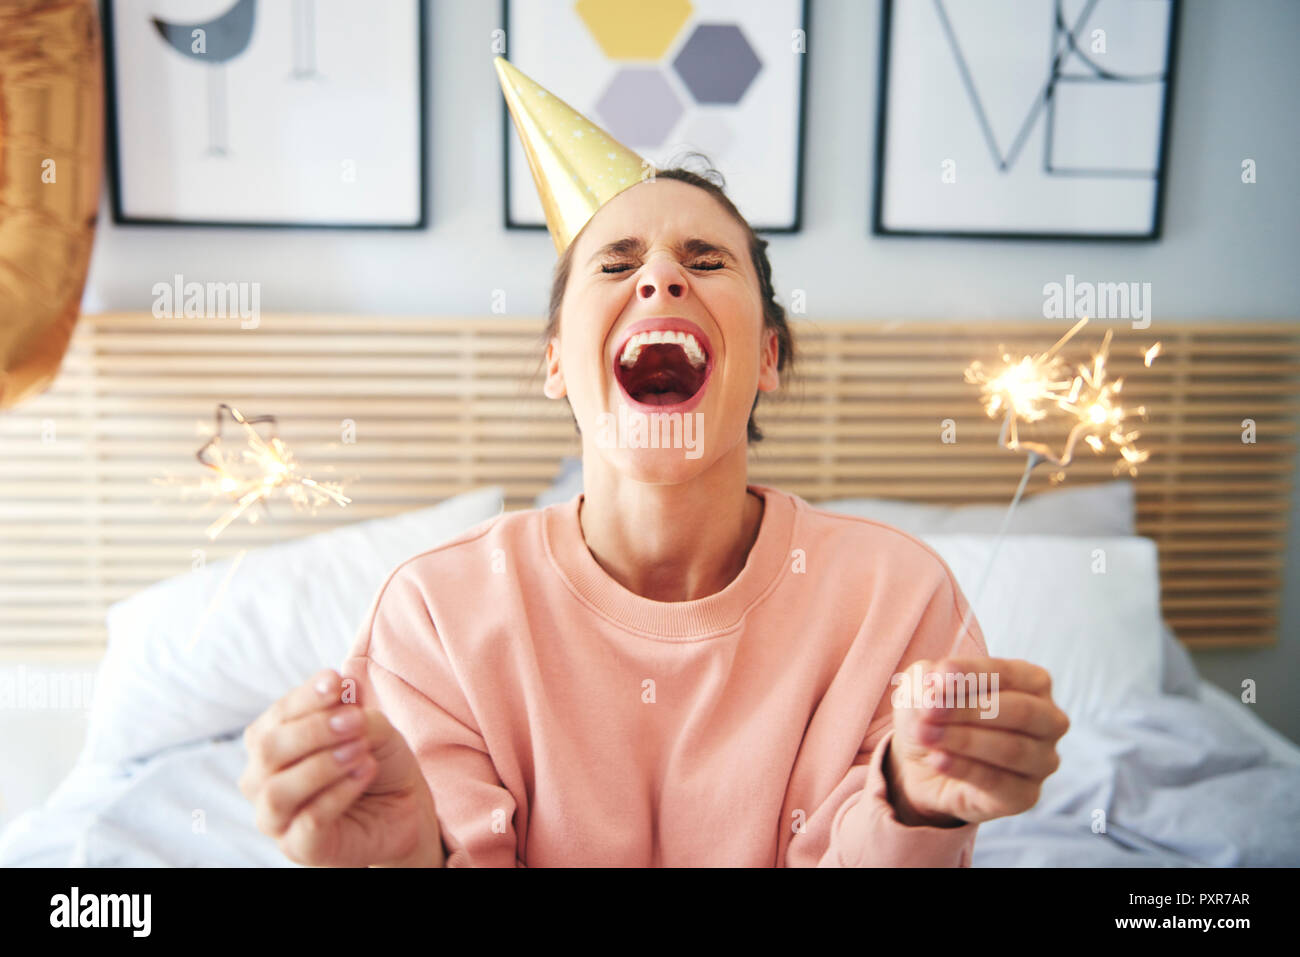 Cheerful woman during her birthday with sparklers Stock Photo